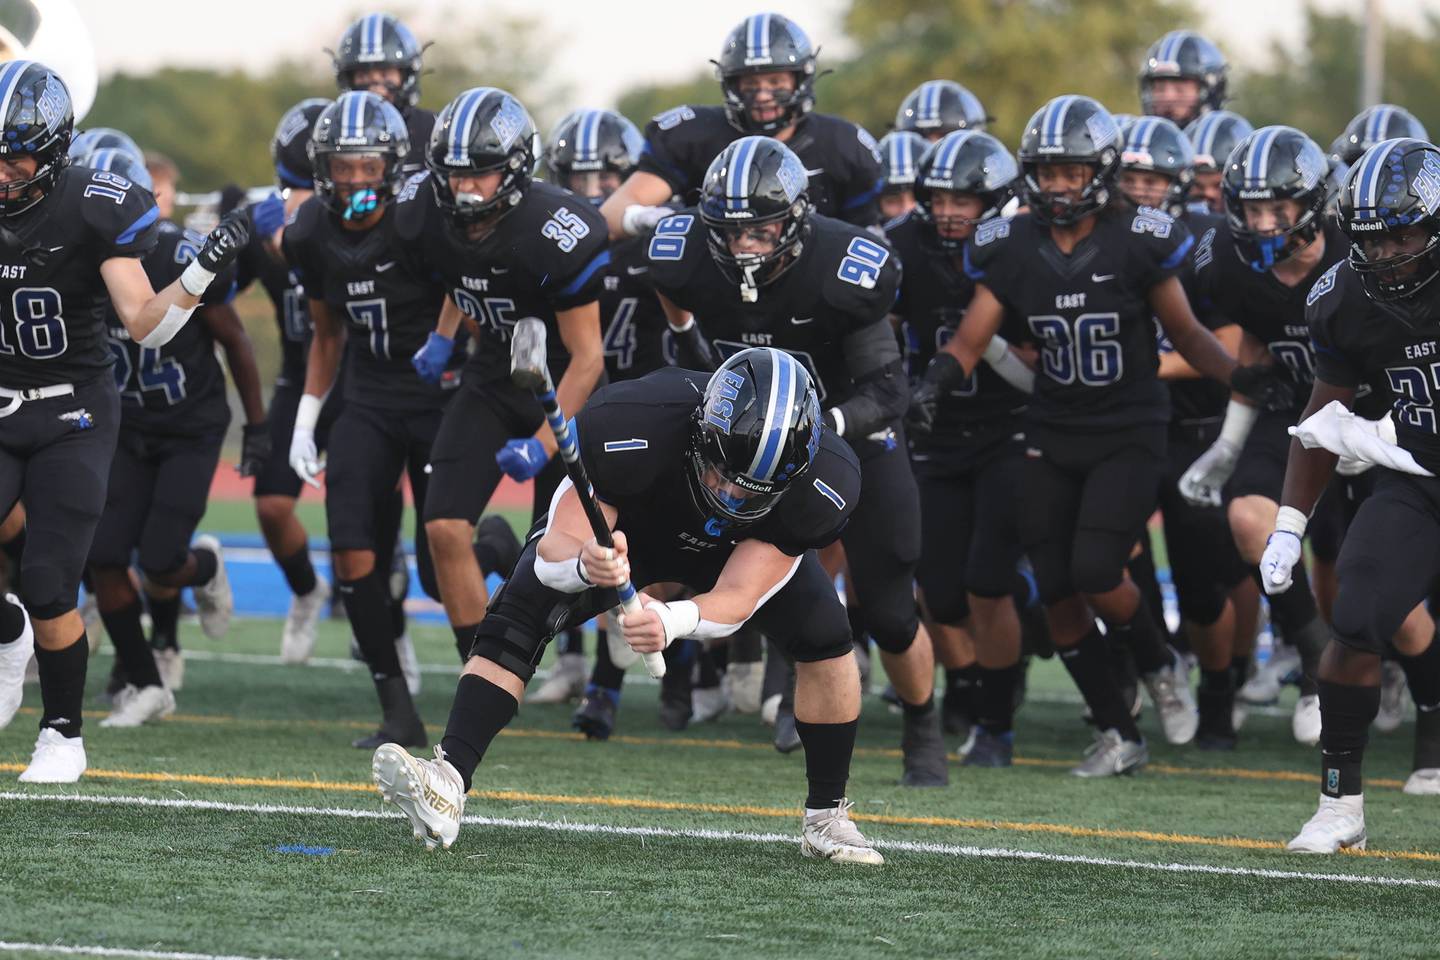 Lincoln-Way East’s Jake Scianna does the traditional sledge hammer slam as the team enters the field before the game against Batavia. Friday, Sept. 2, 2022, in Frankfort.